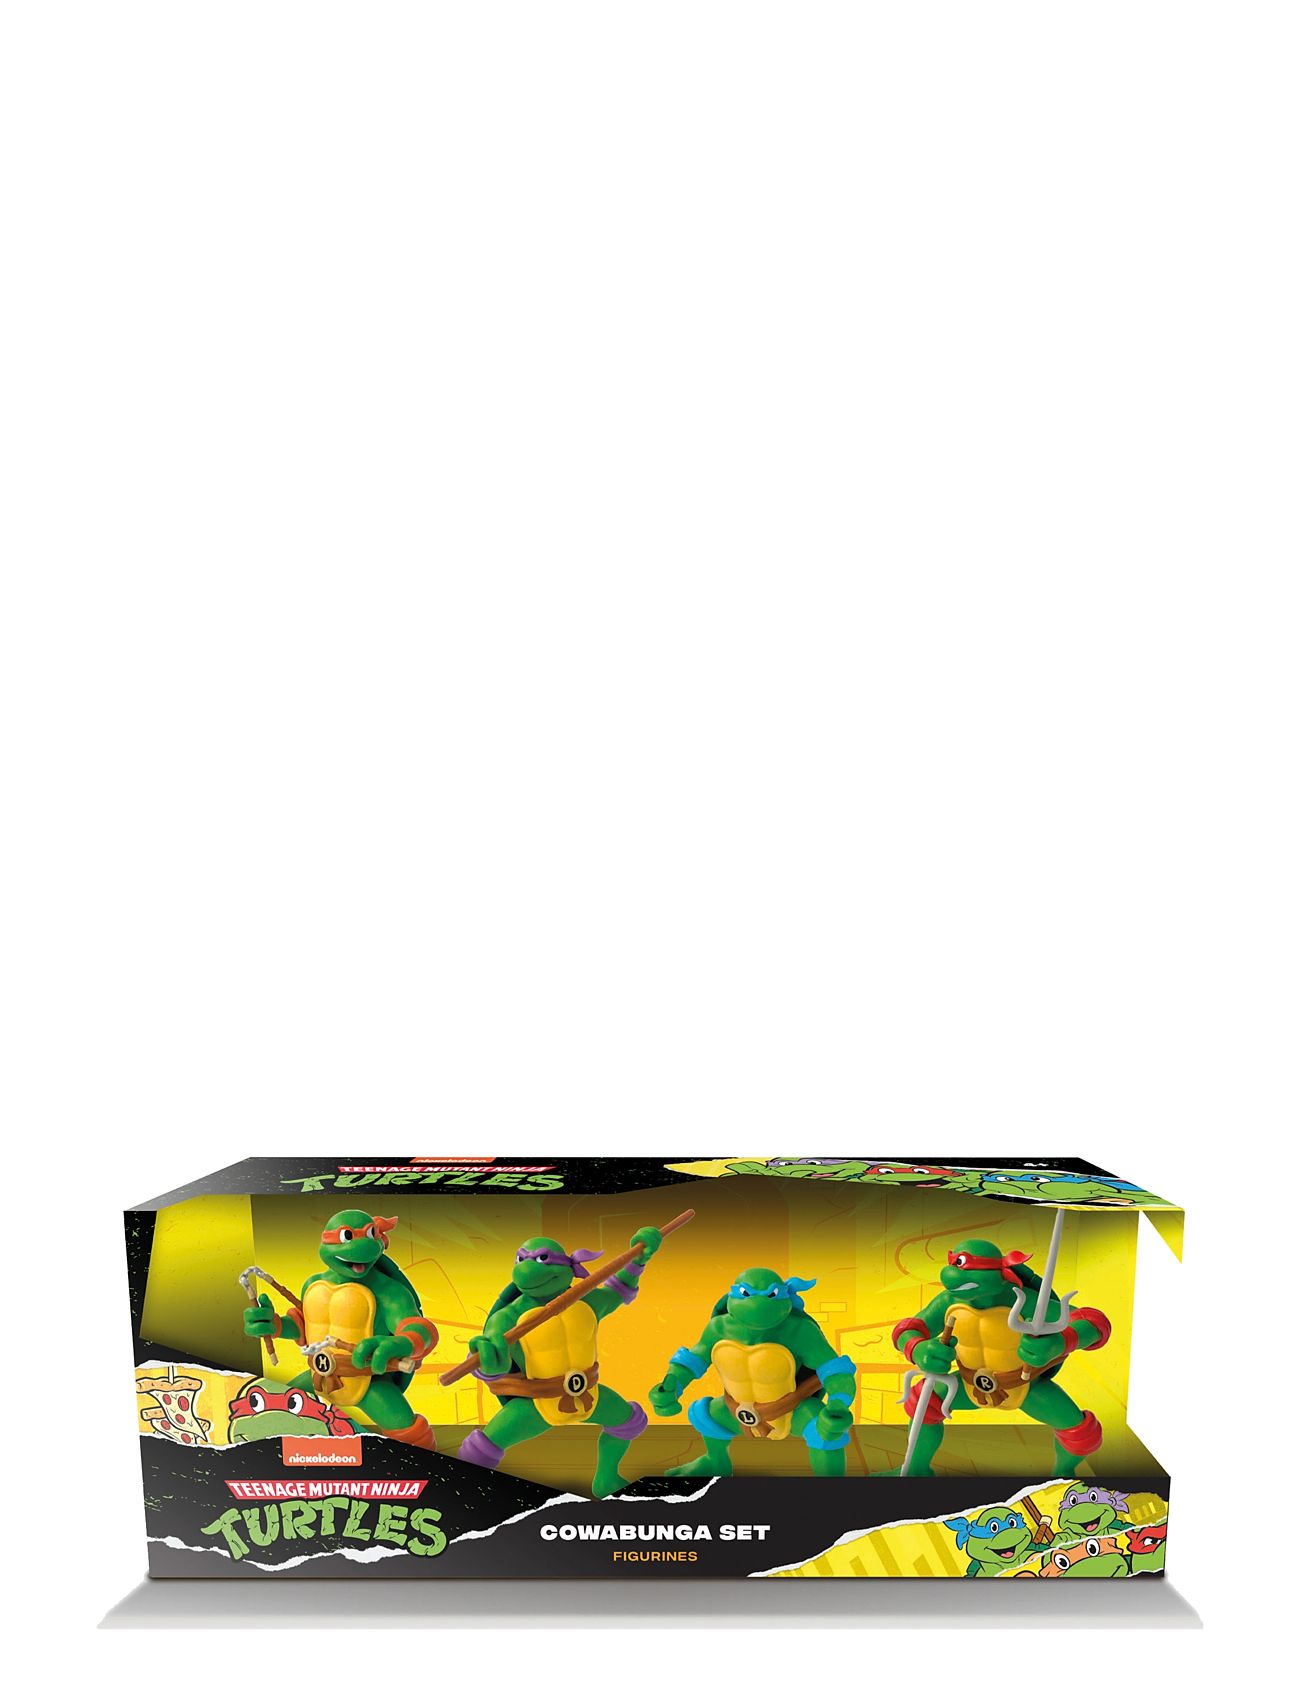 Tmnt Gift Box Set 4 Figurines Toys Playsets & Action Figures Action Figures Multi/patterned Comansi